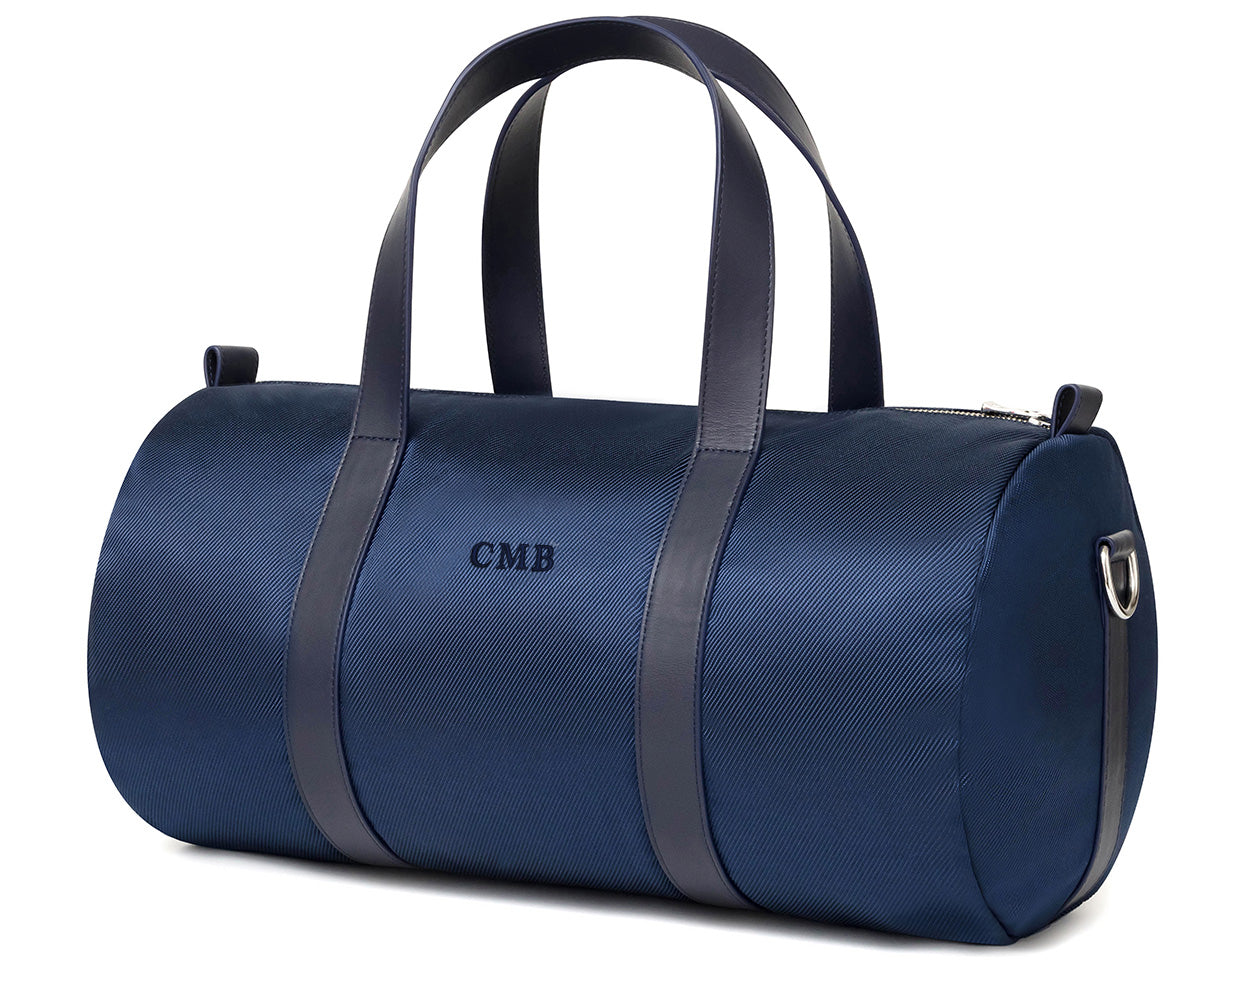 Navy banker bags custom with dark leather straps and embroidered lettering from Holderness and Bourne angled to the left.